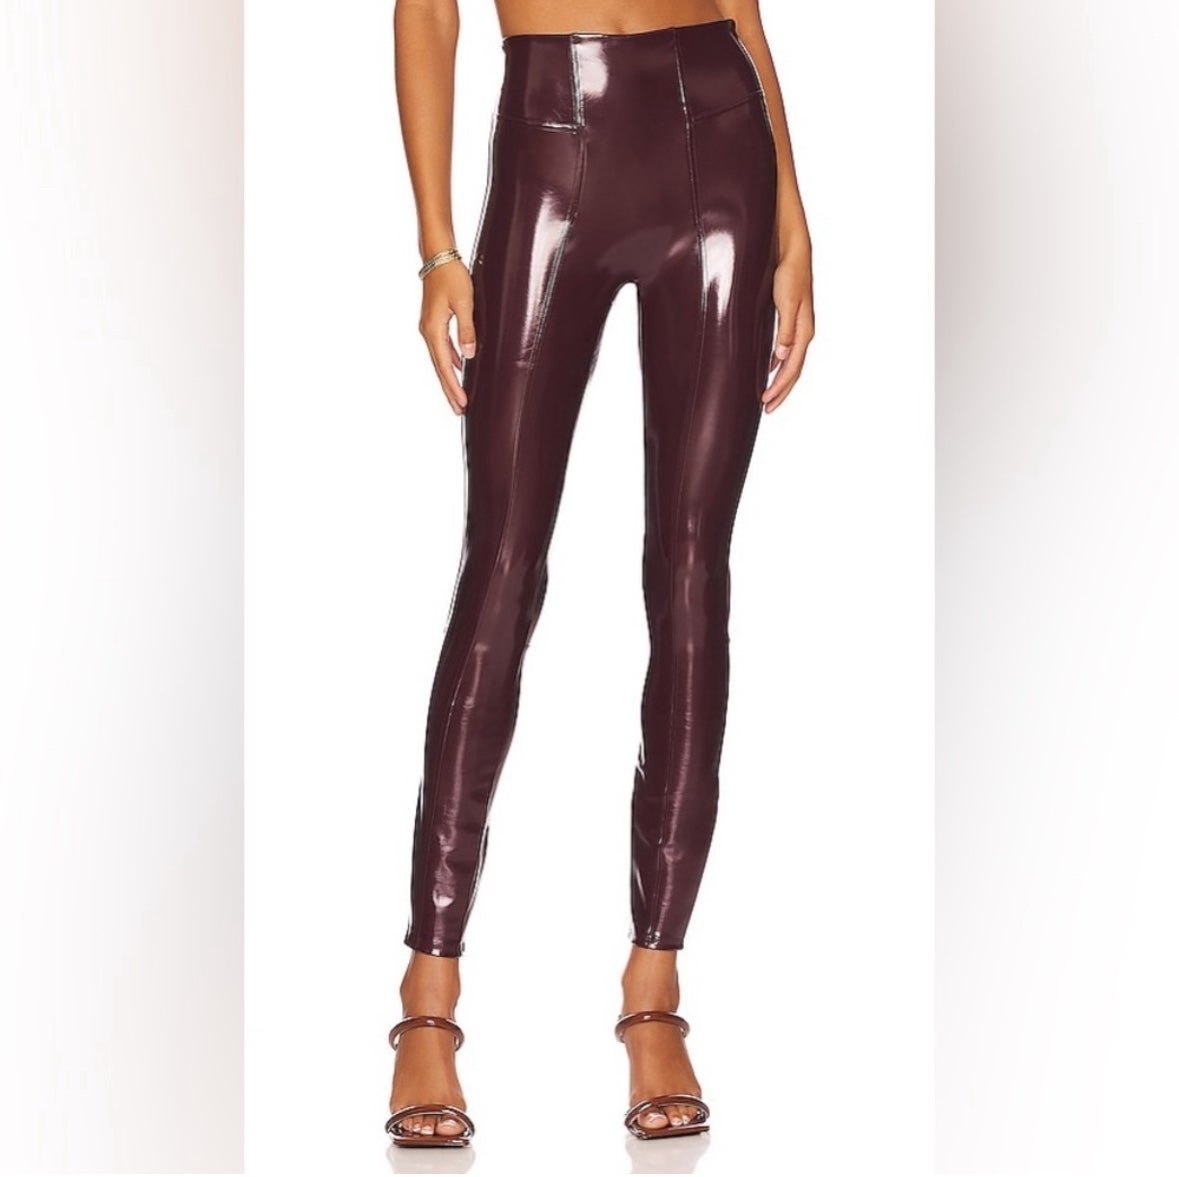 Special offer  Spanx- Faux Patent Leather Leggings In Ruby Size Small-Petite 25” Ji4xwIQ20 on sale